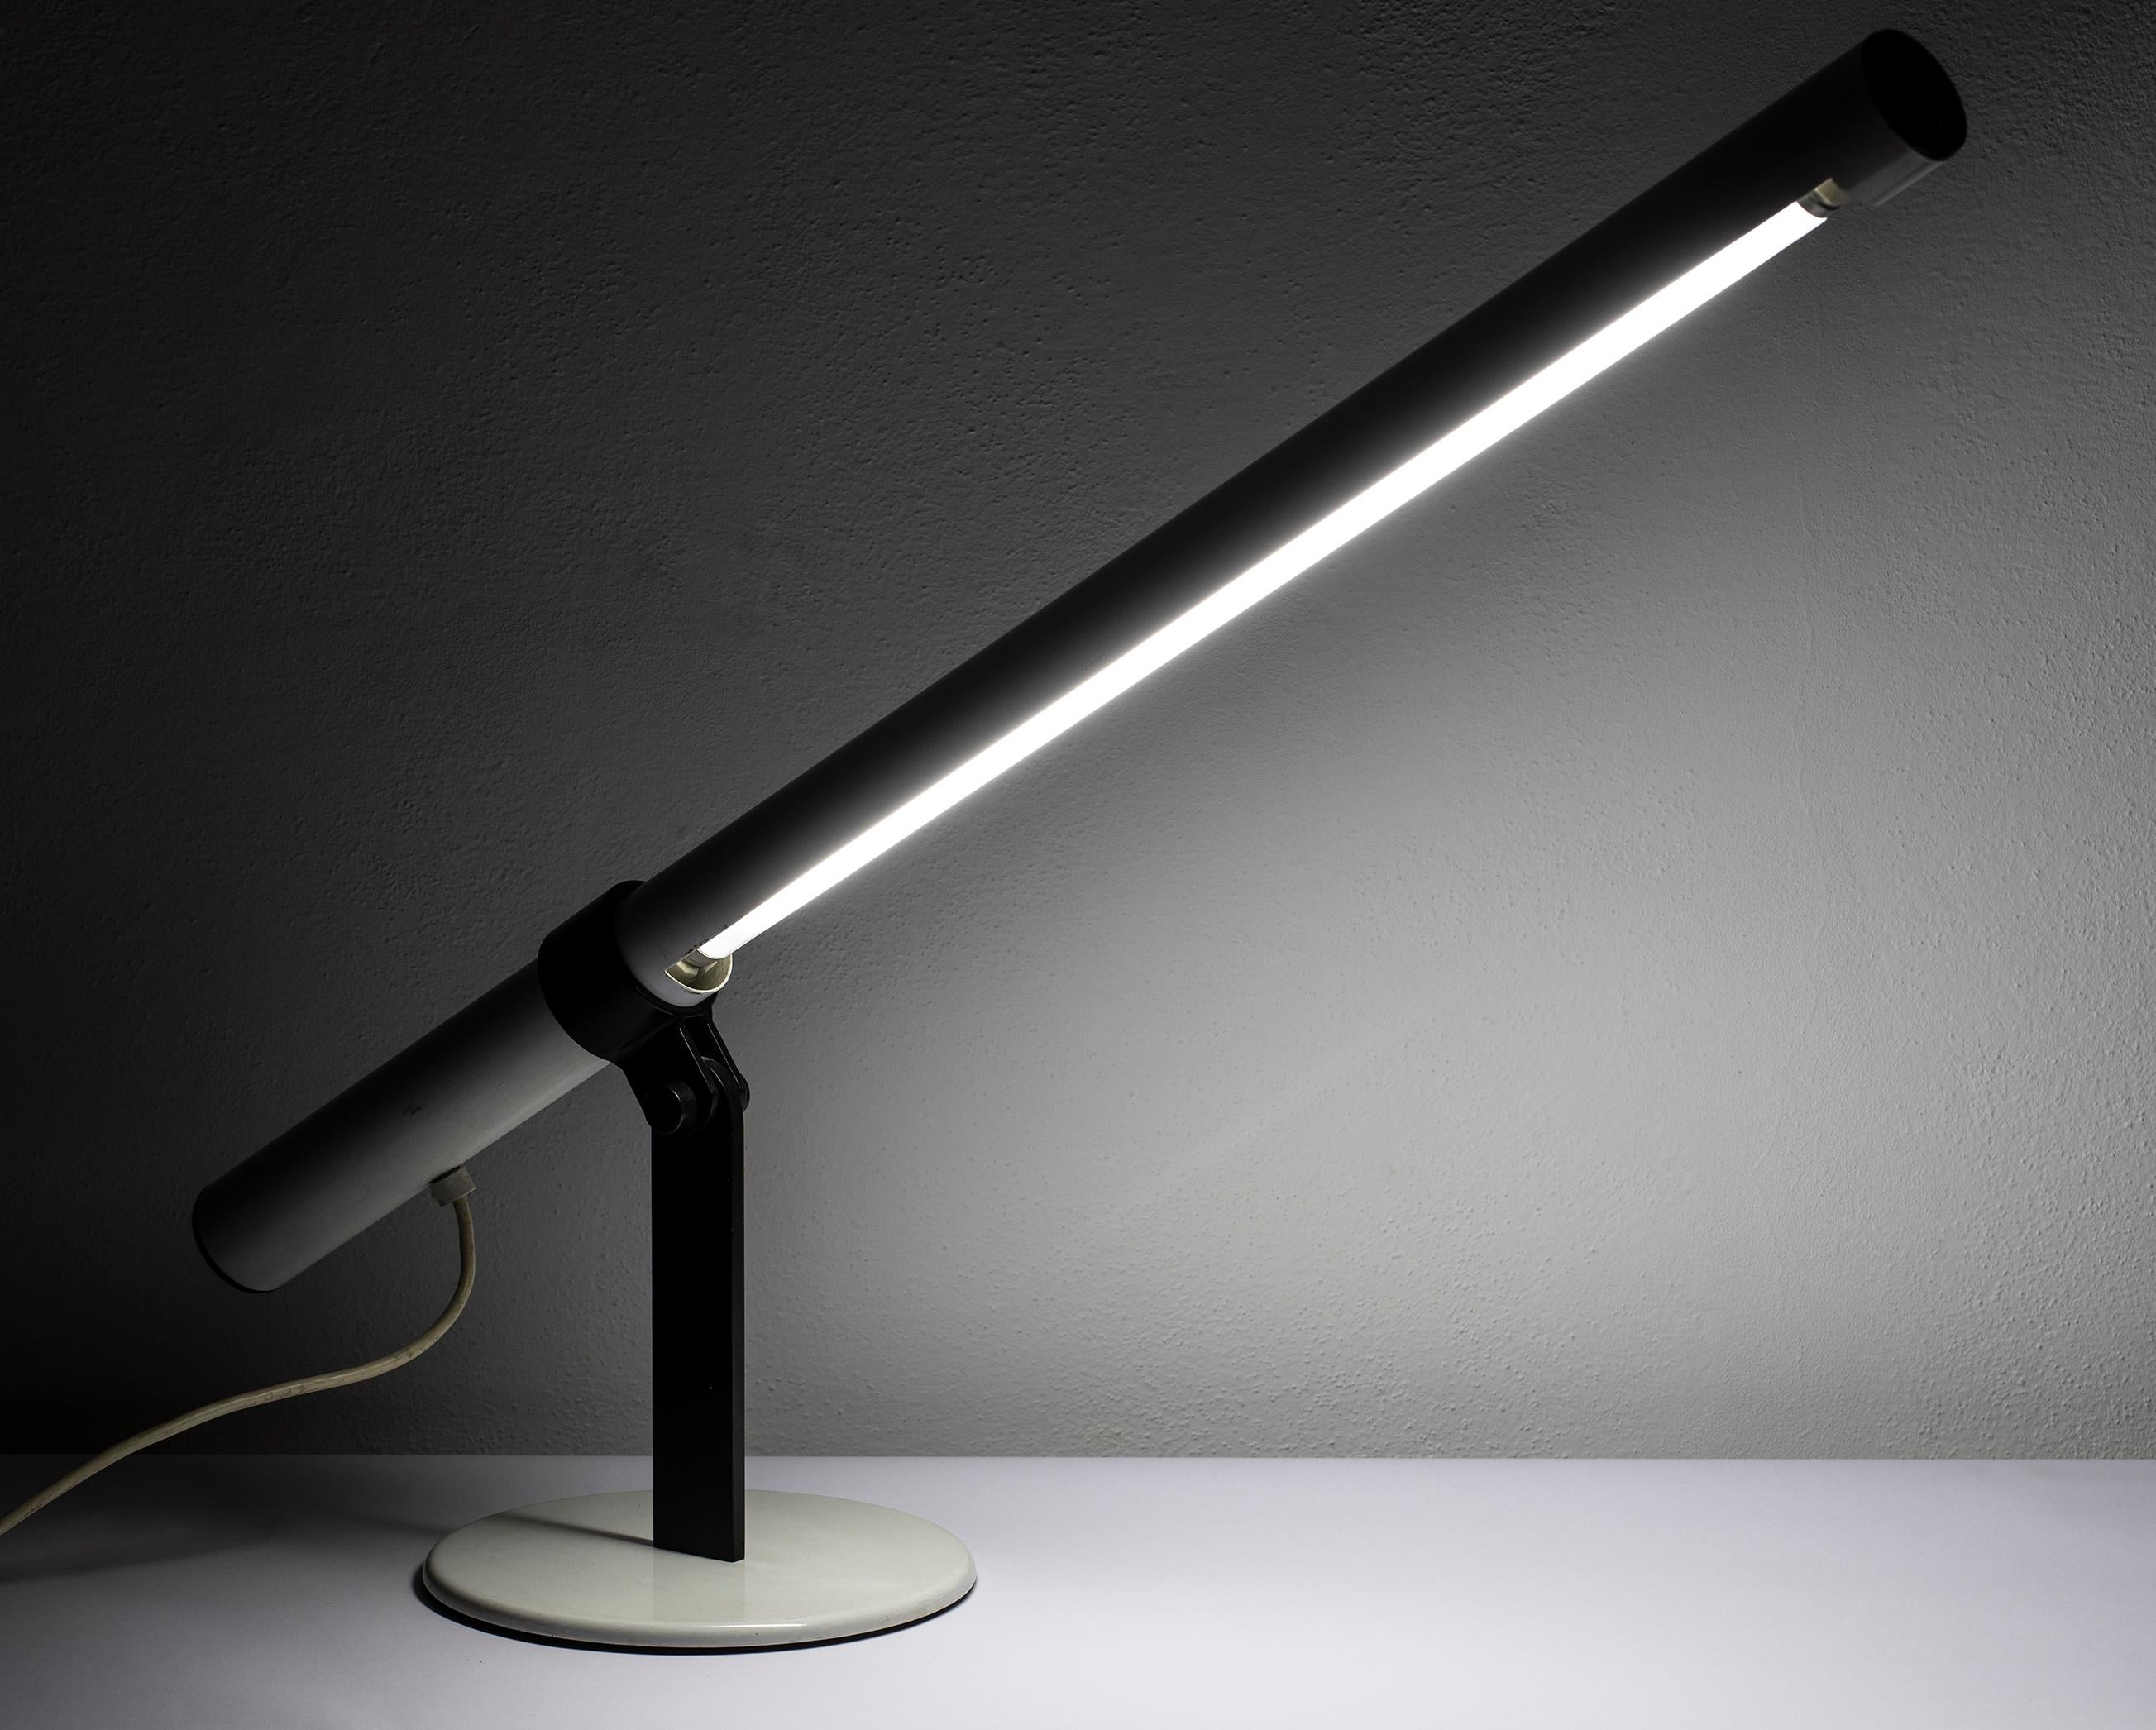 Particular neon lamp, produced in Italy in the 1970s. It features a metal chassis lacquered in shades of white, containing a neon tube; the structure is tilting and adjustable and rests on a metal base lacquered in black. Presents some minor